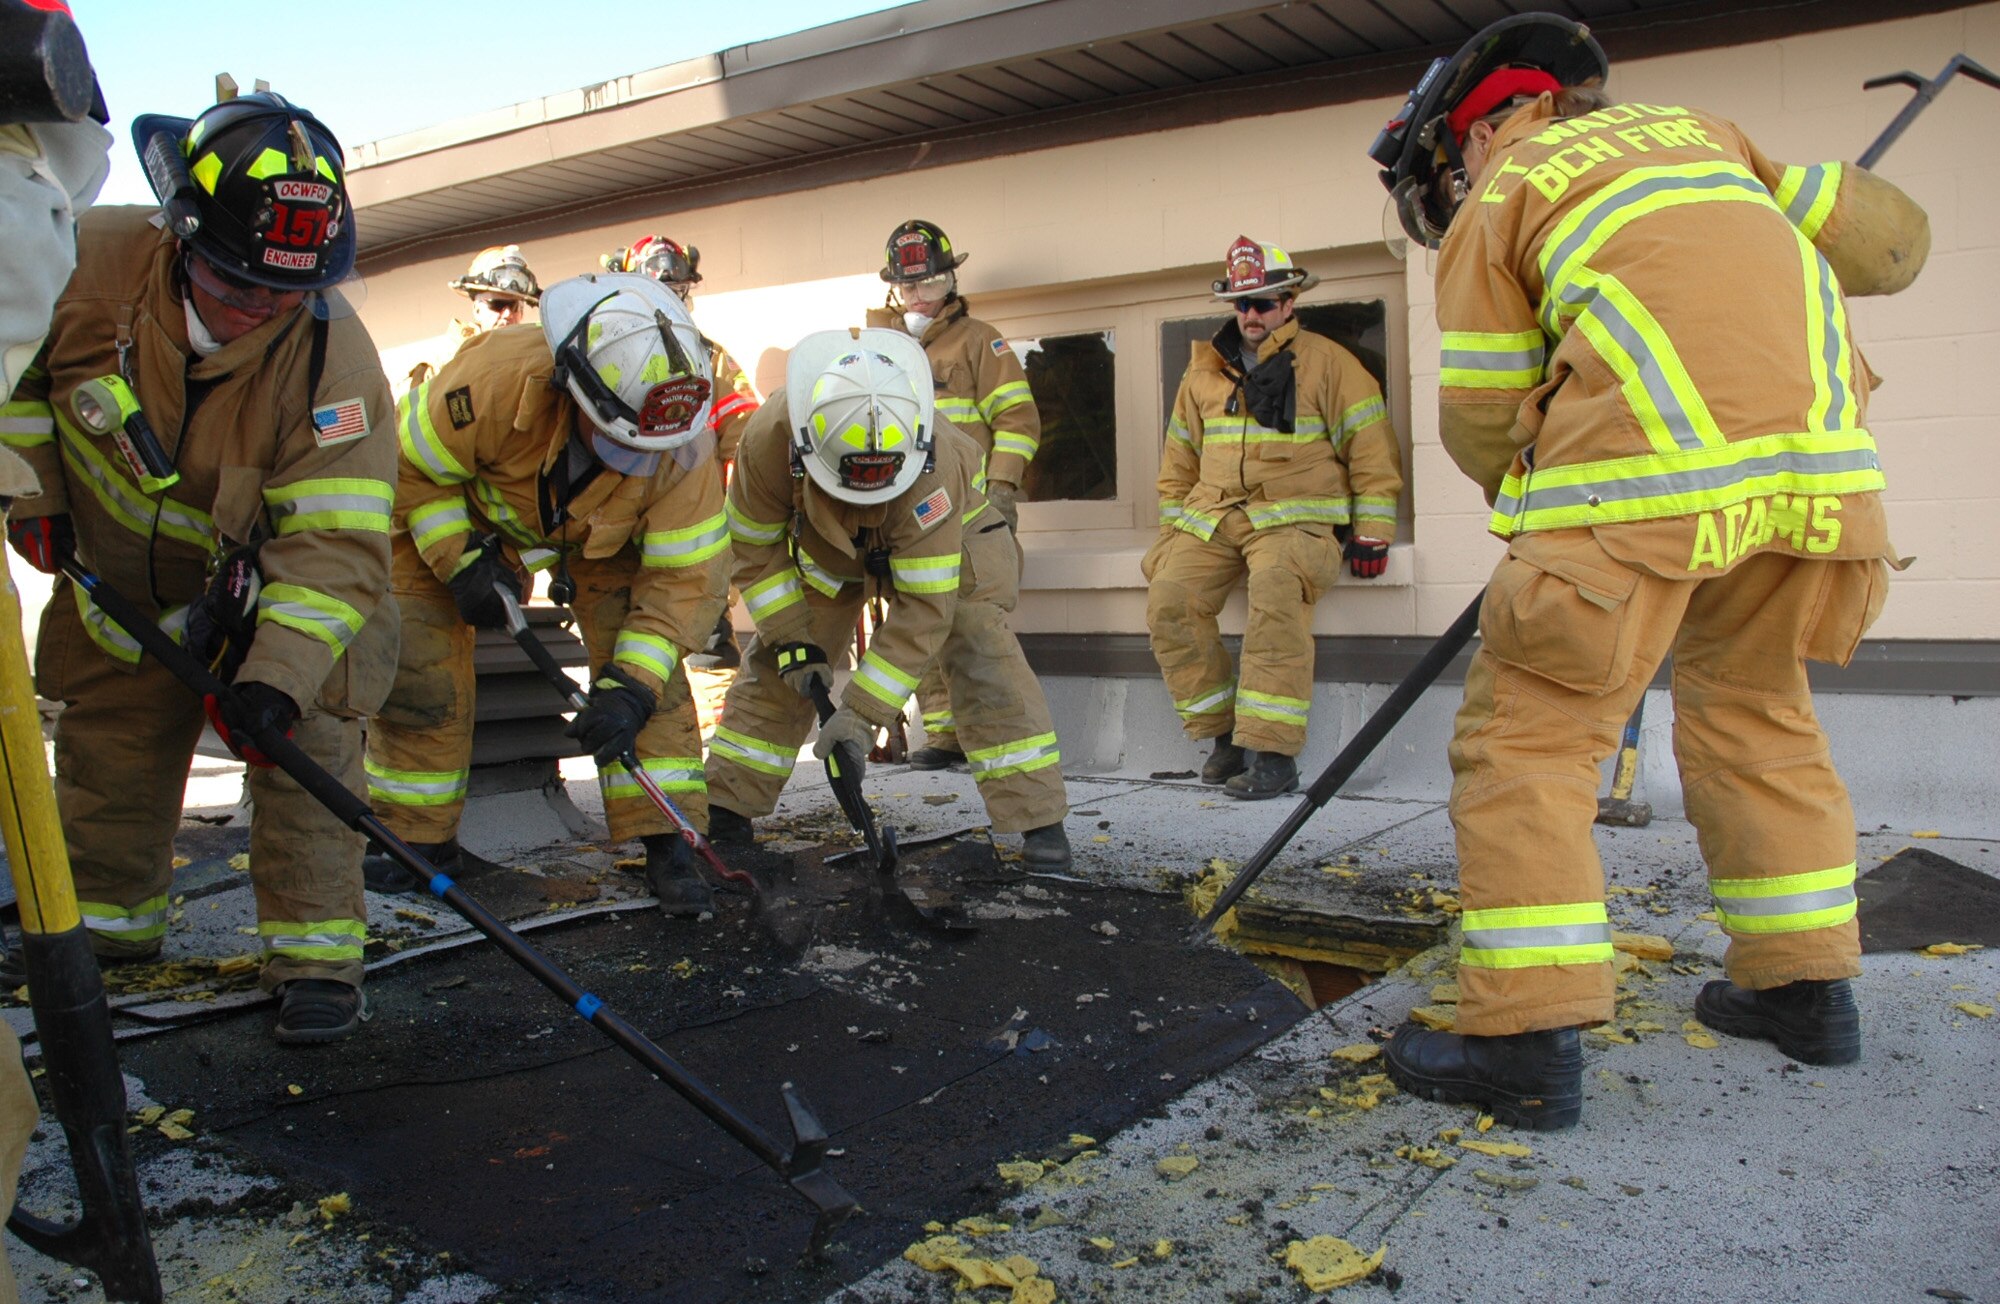 Firefighters from Hurlburt Field and local fire departments  peel back tar-sealed layers of roofing atop the old Hurlburt Field Fire Department Jan. 13. Teams used chainsaws and axes over specific sections with the location of the fire and the building’s structural integrity in mind. (U.S. Air Force photo by Airman 1st Class Joe McFadden)